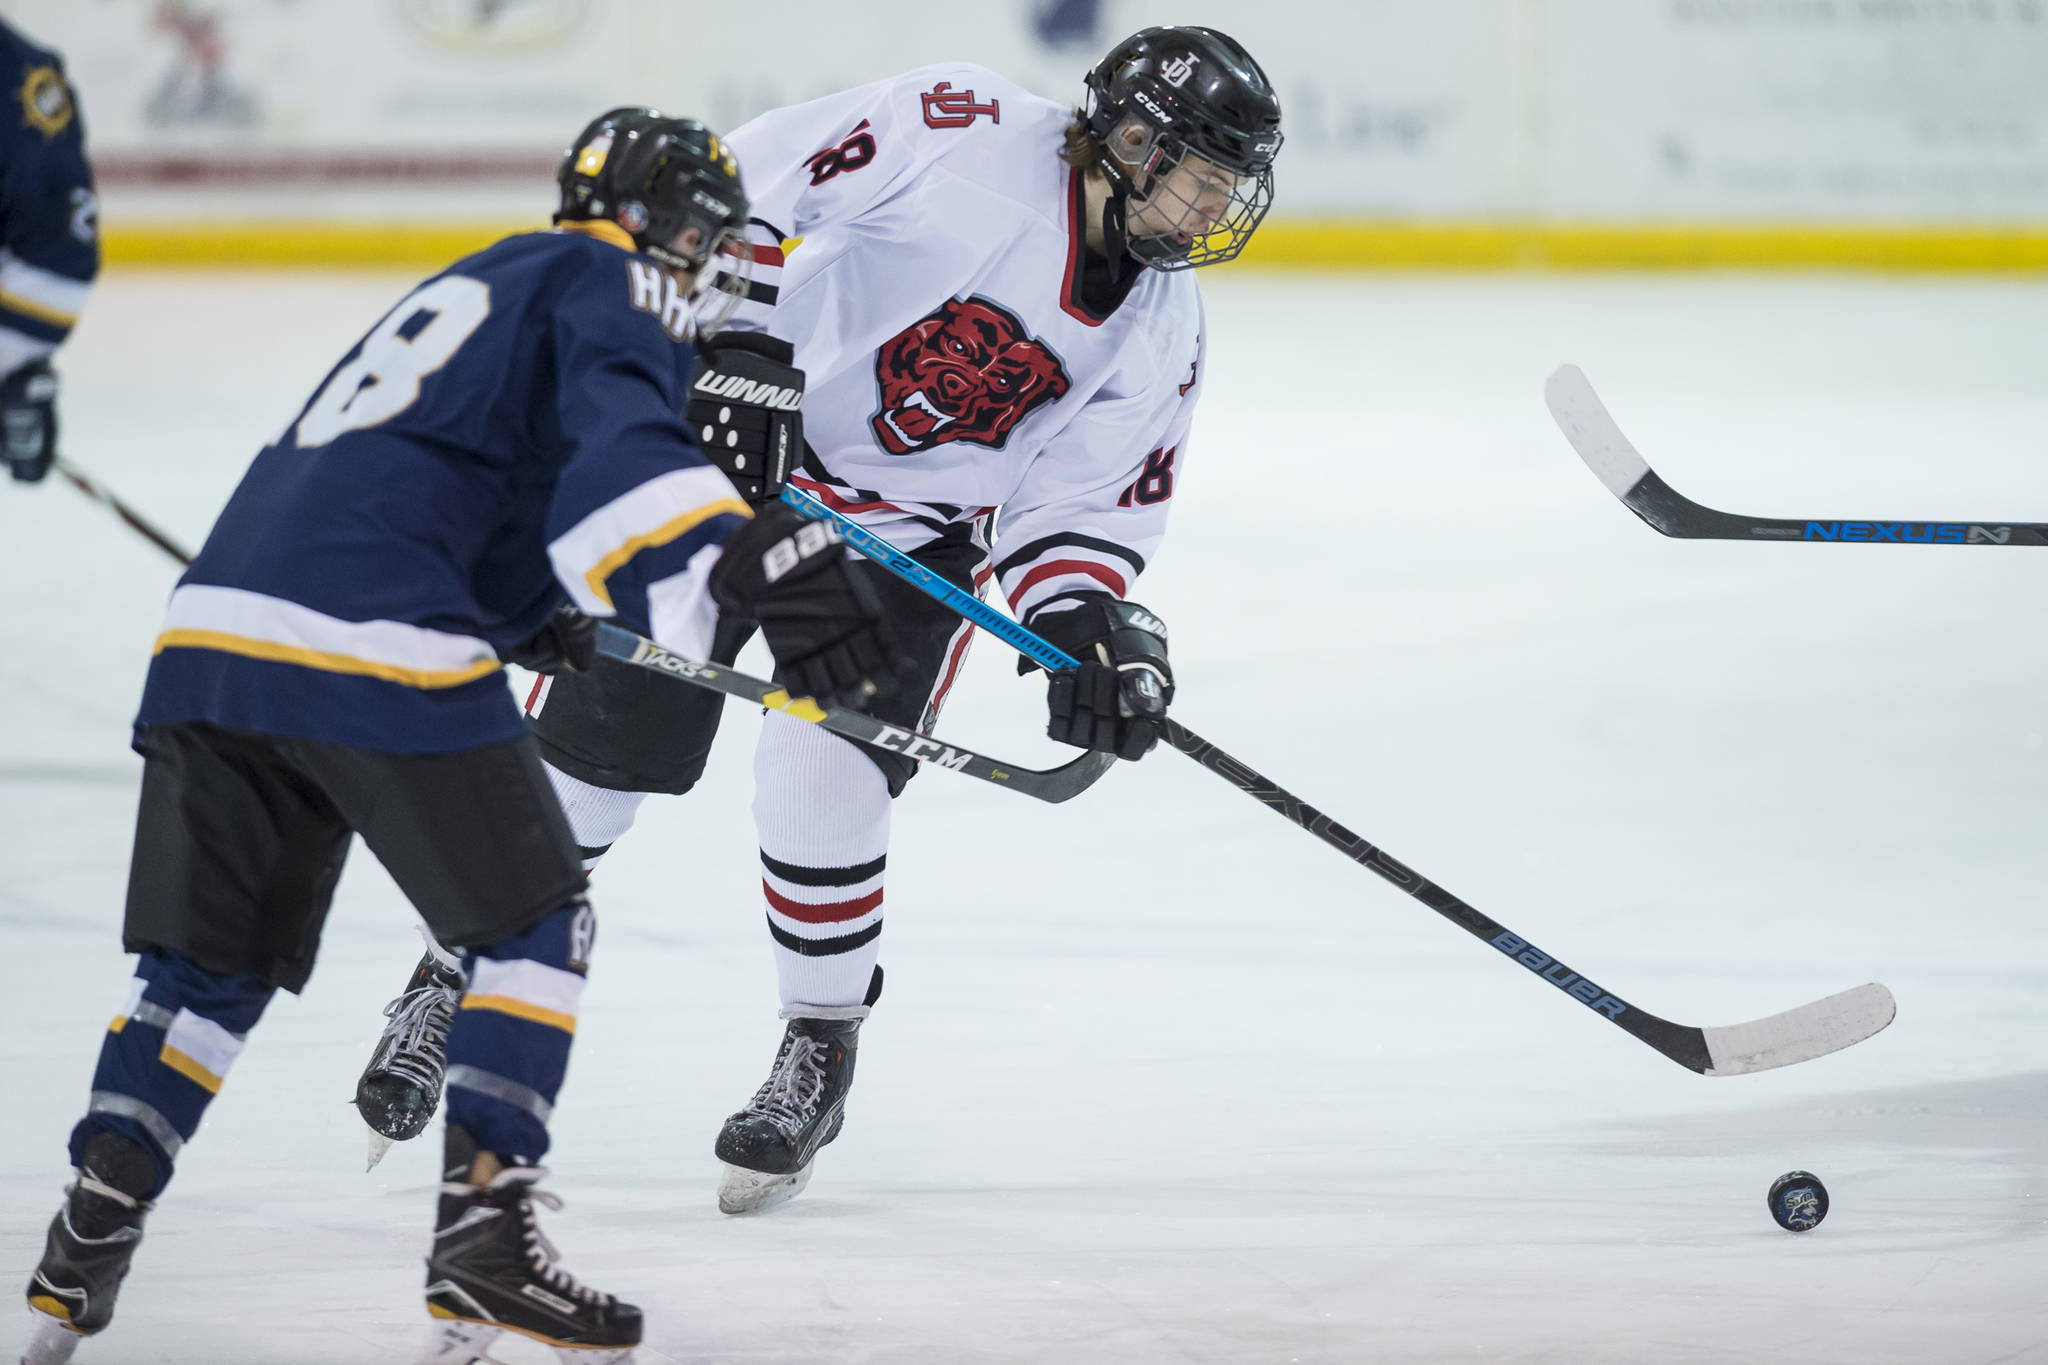 Juneau-Douglas’ Dalton Hoy, right, moves the puck against Homer’s Bergen Knutson at Treadwell Arena on Friday, Jan. 18, 2019. JDHS and Homer square off in the ASAA First National Cup state hockey semifinals on Friday in the Curtis Menard Sports Complex in Wasilla. (Michael Penn | Juneau Empire File)